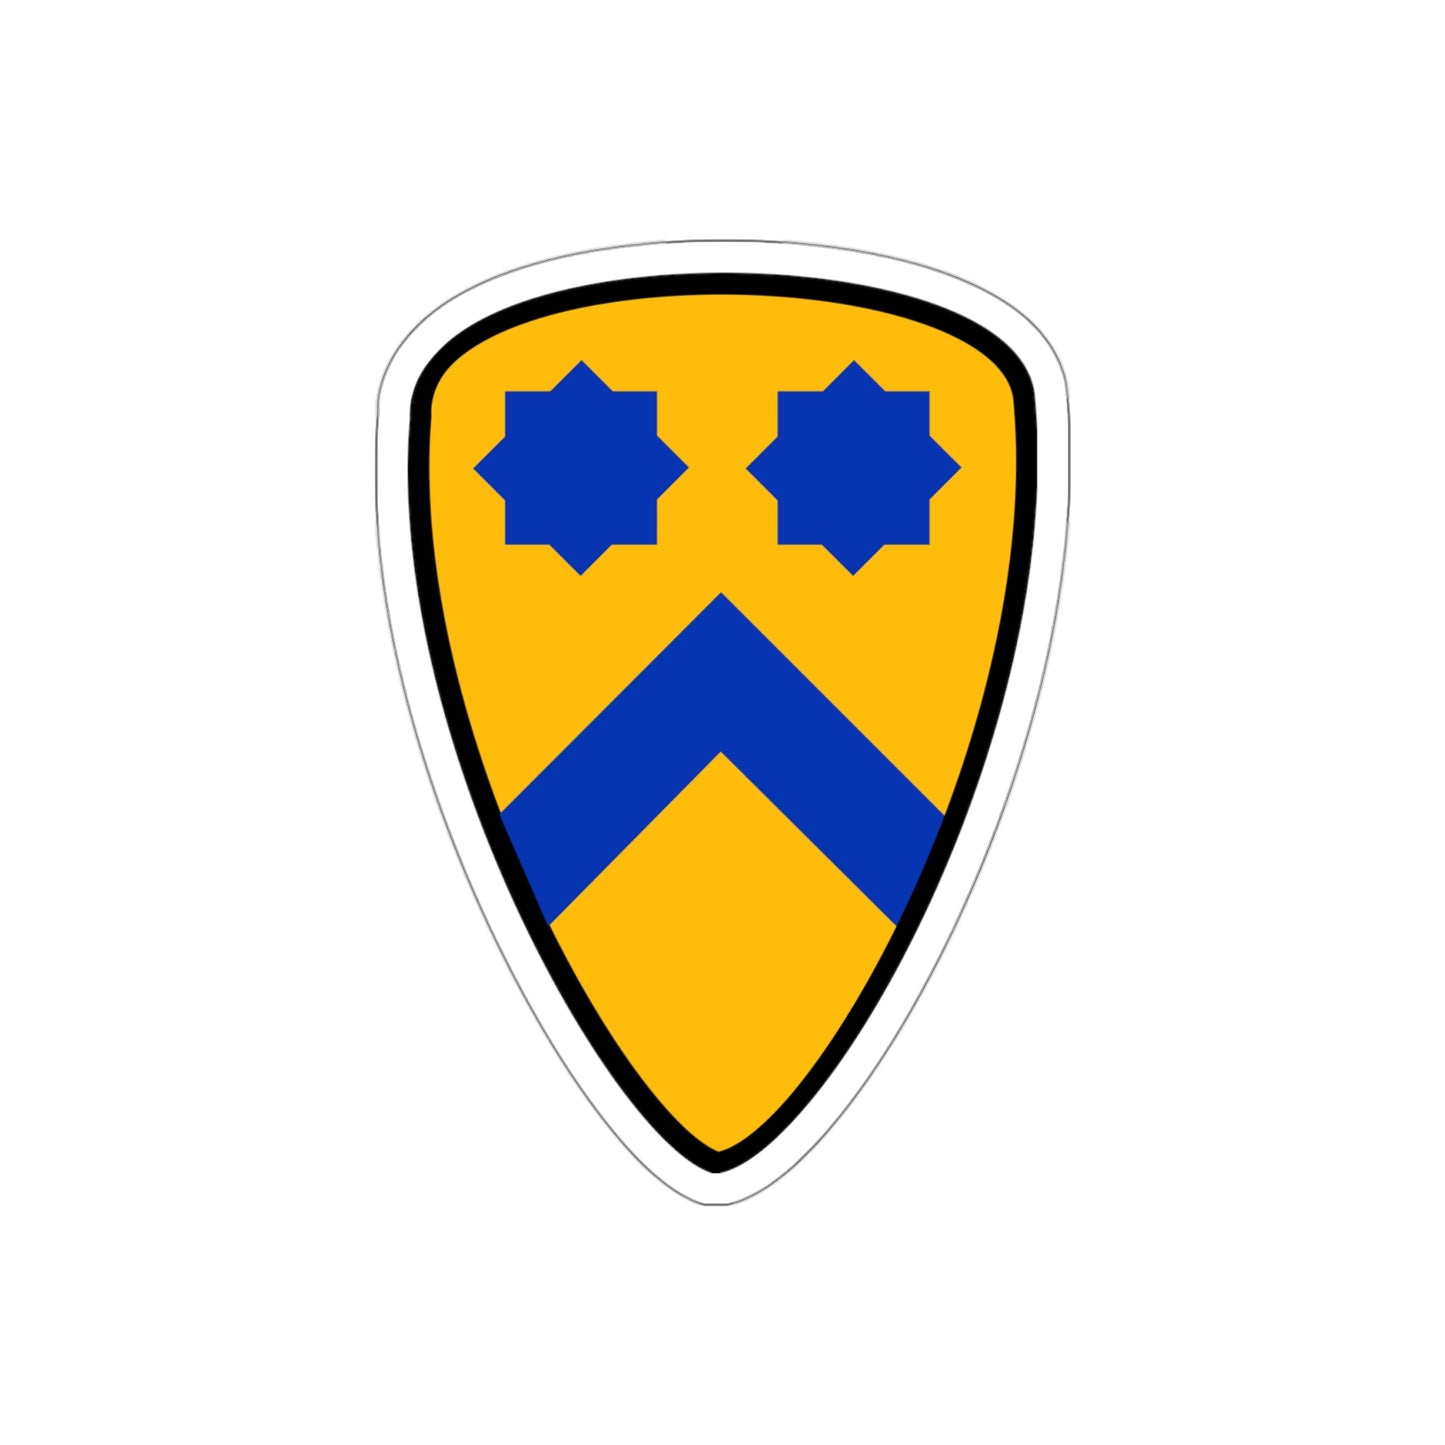 2nd Cavalry Division